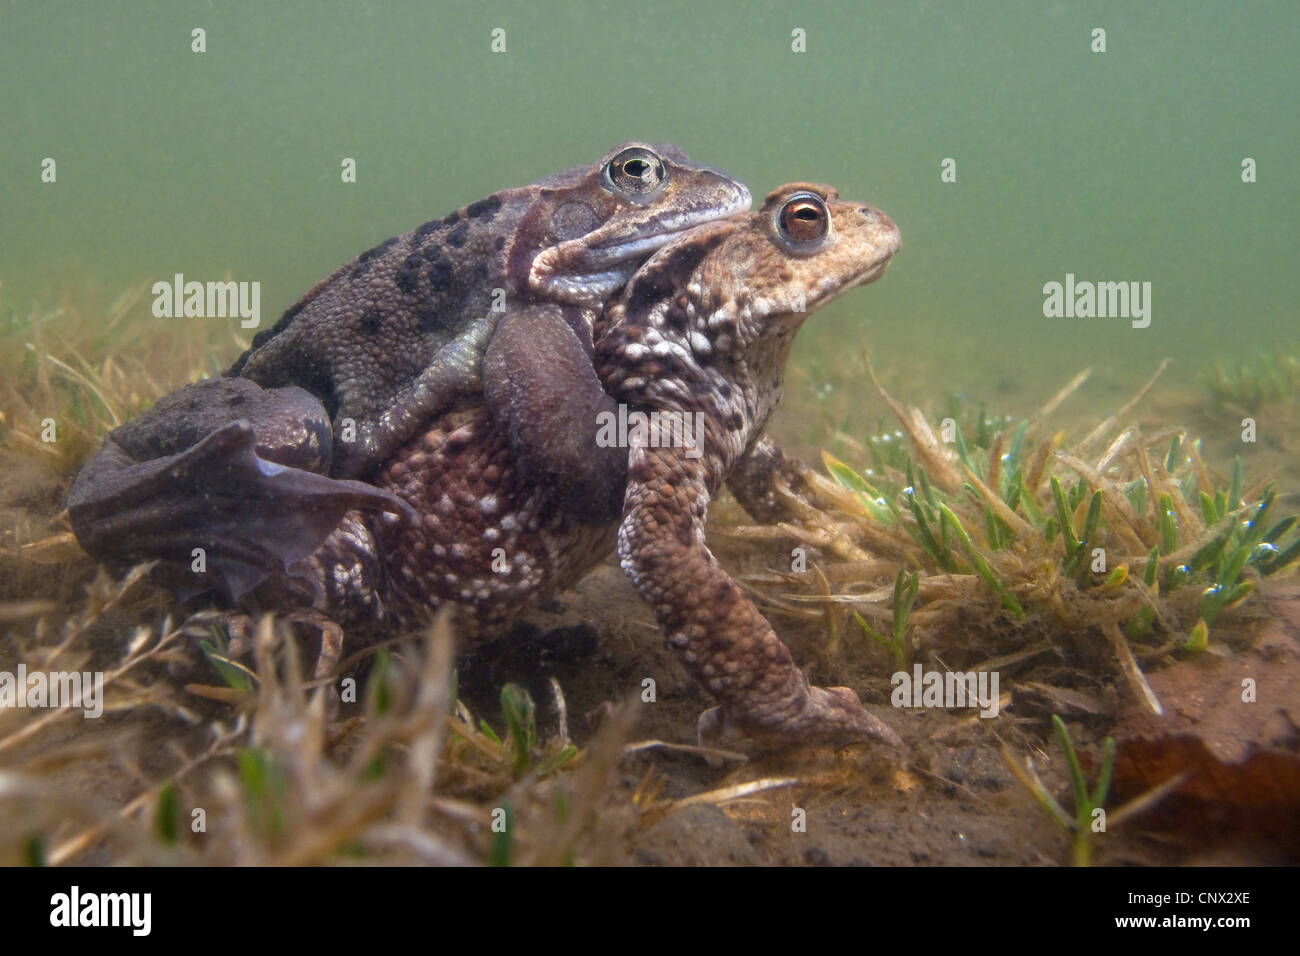 common frog, grass frog (Rana temporaria), grass clasping a female common toad at the bottom of a pond at mating season, Germany, Rhineland-Palatinate Stock Photo